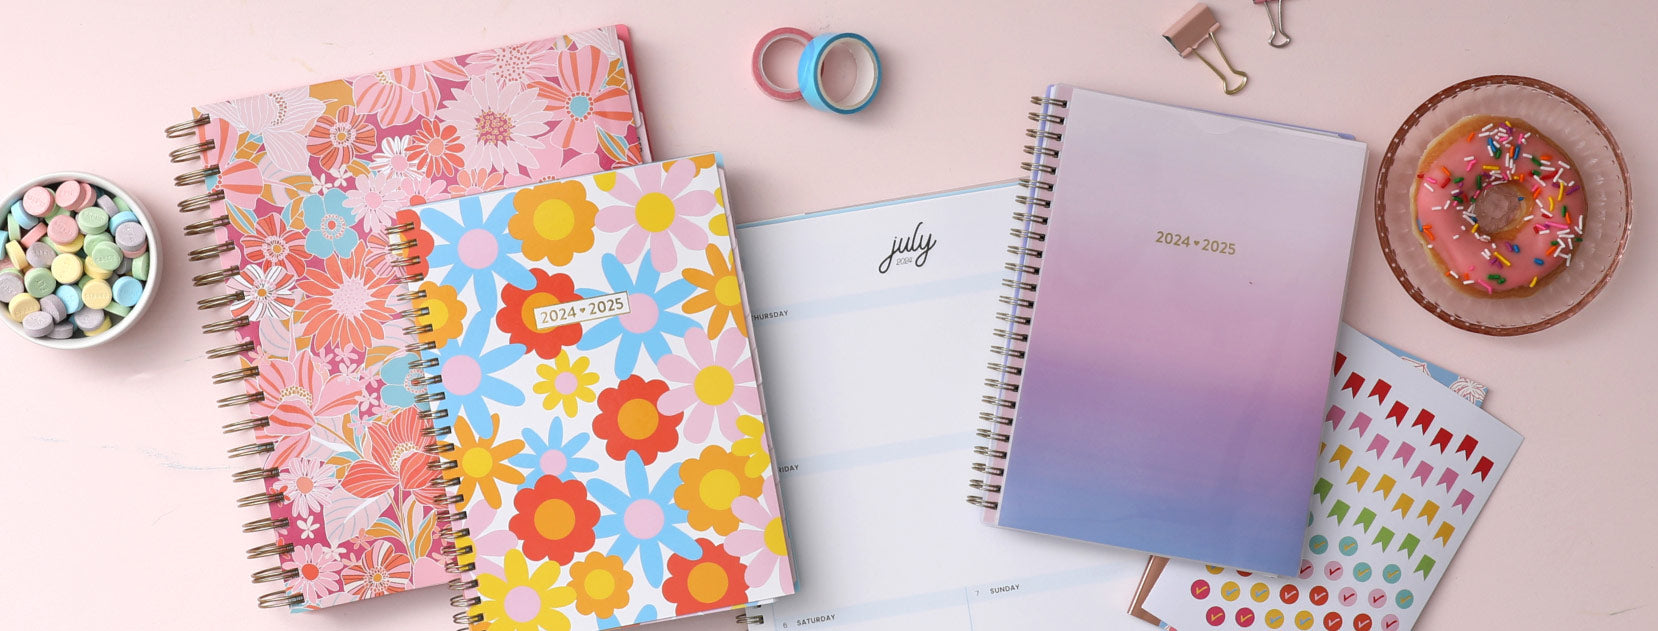 Brighten up your day with various 2024-2025 colorful and vibrant planners, surrounded by a bowl of candies, a plate of donuts and stickers. 